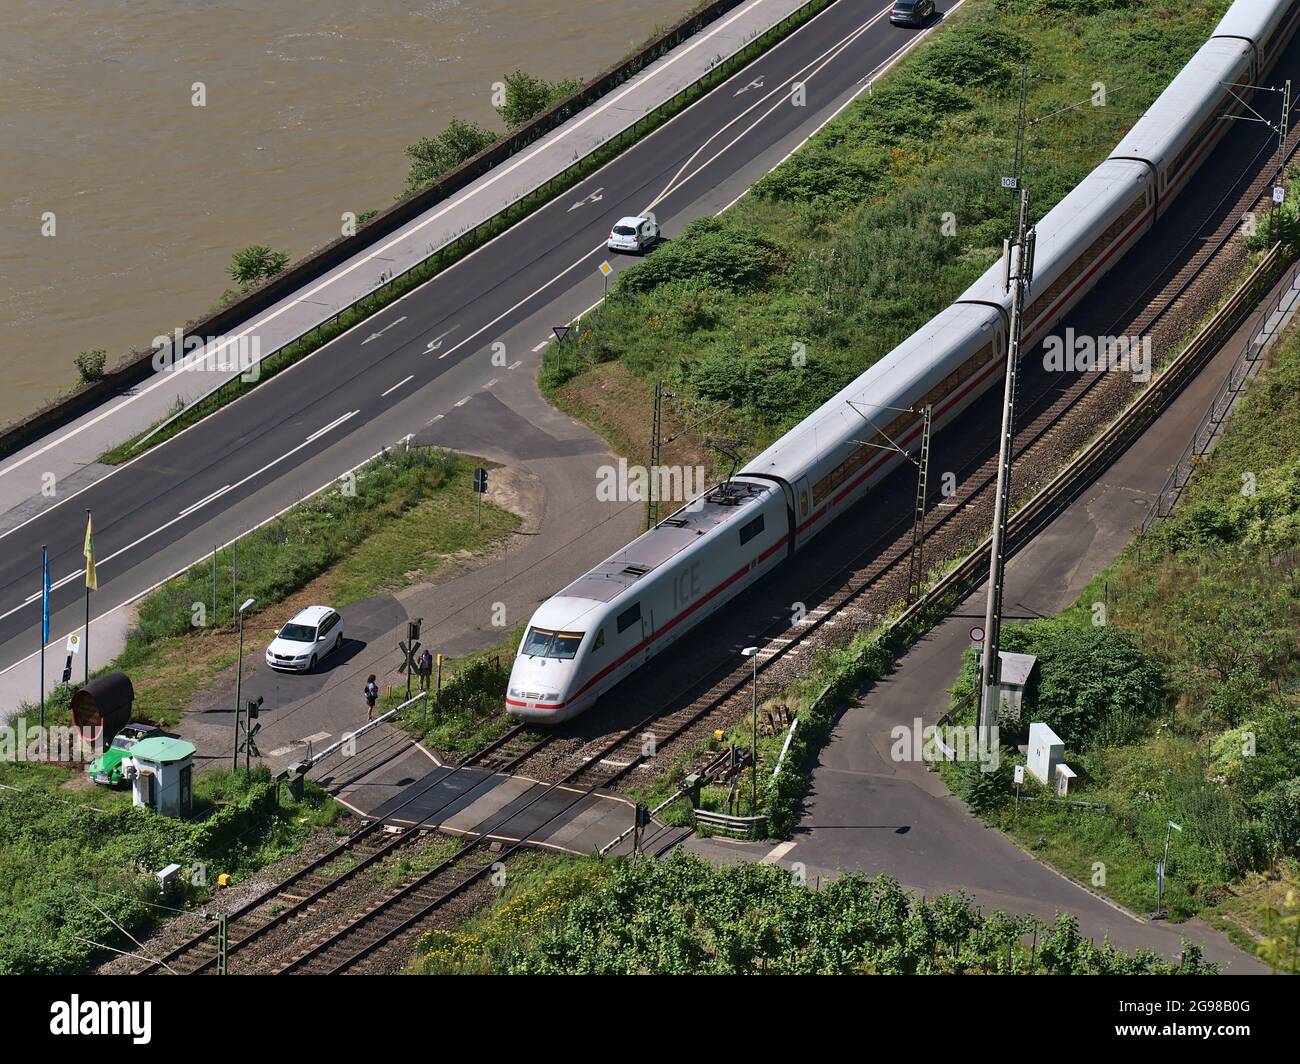 Aerial view of InterCity Express train (ICE) of Deutsche Bahn AG passing a railway crossing on the bank of Rhine river with car and people waiting. Stock Photo